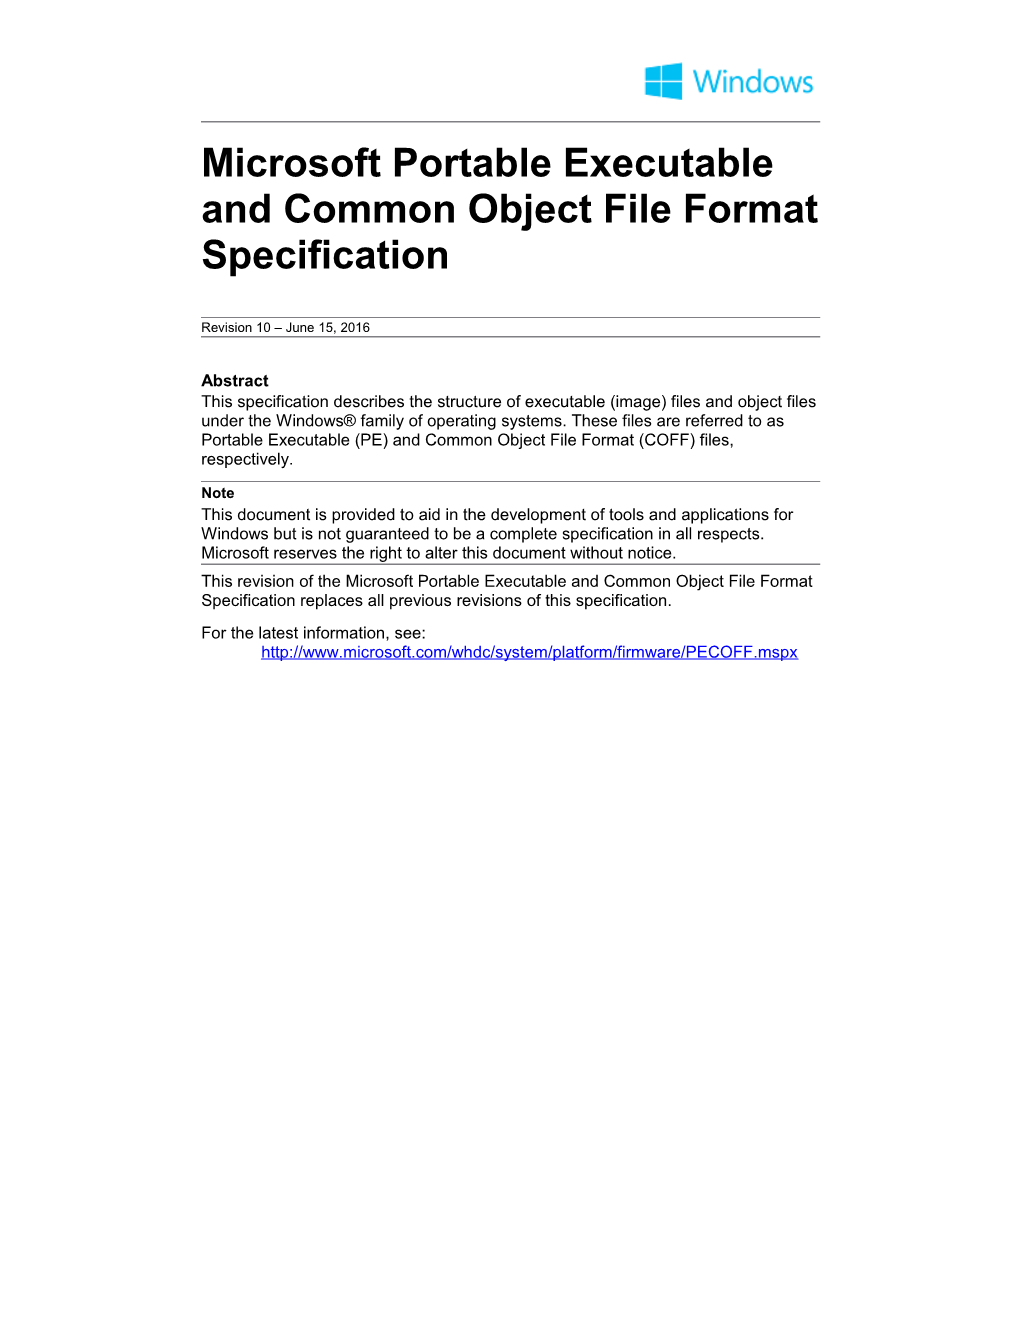 Microsoft Portable Executable and Common Object File Format Specification - 1